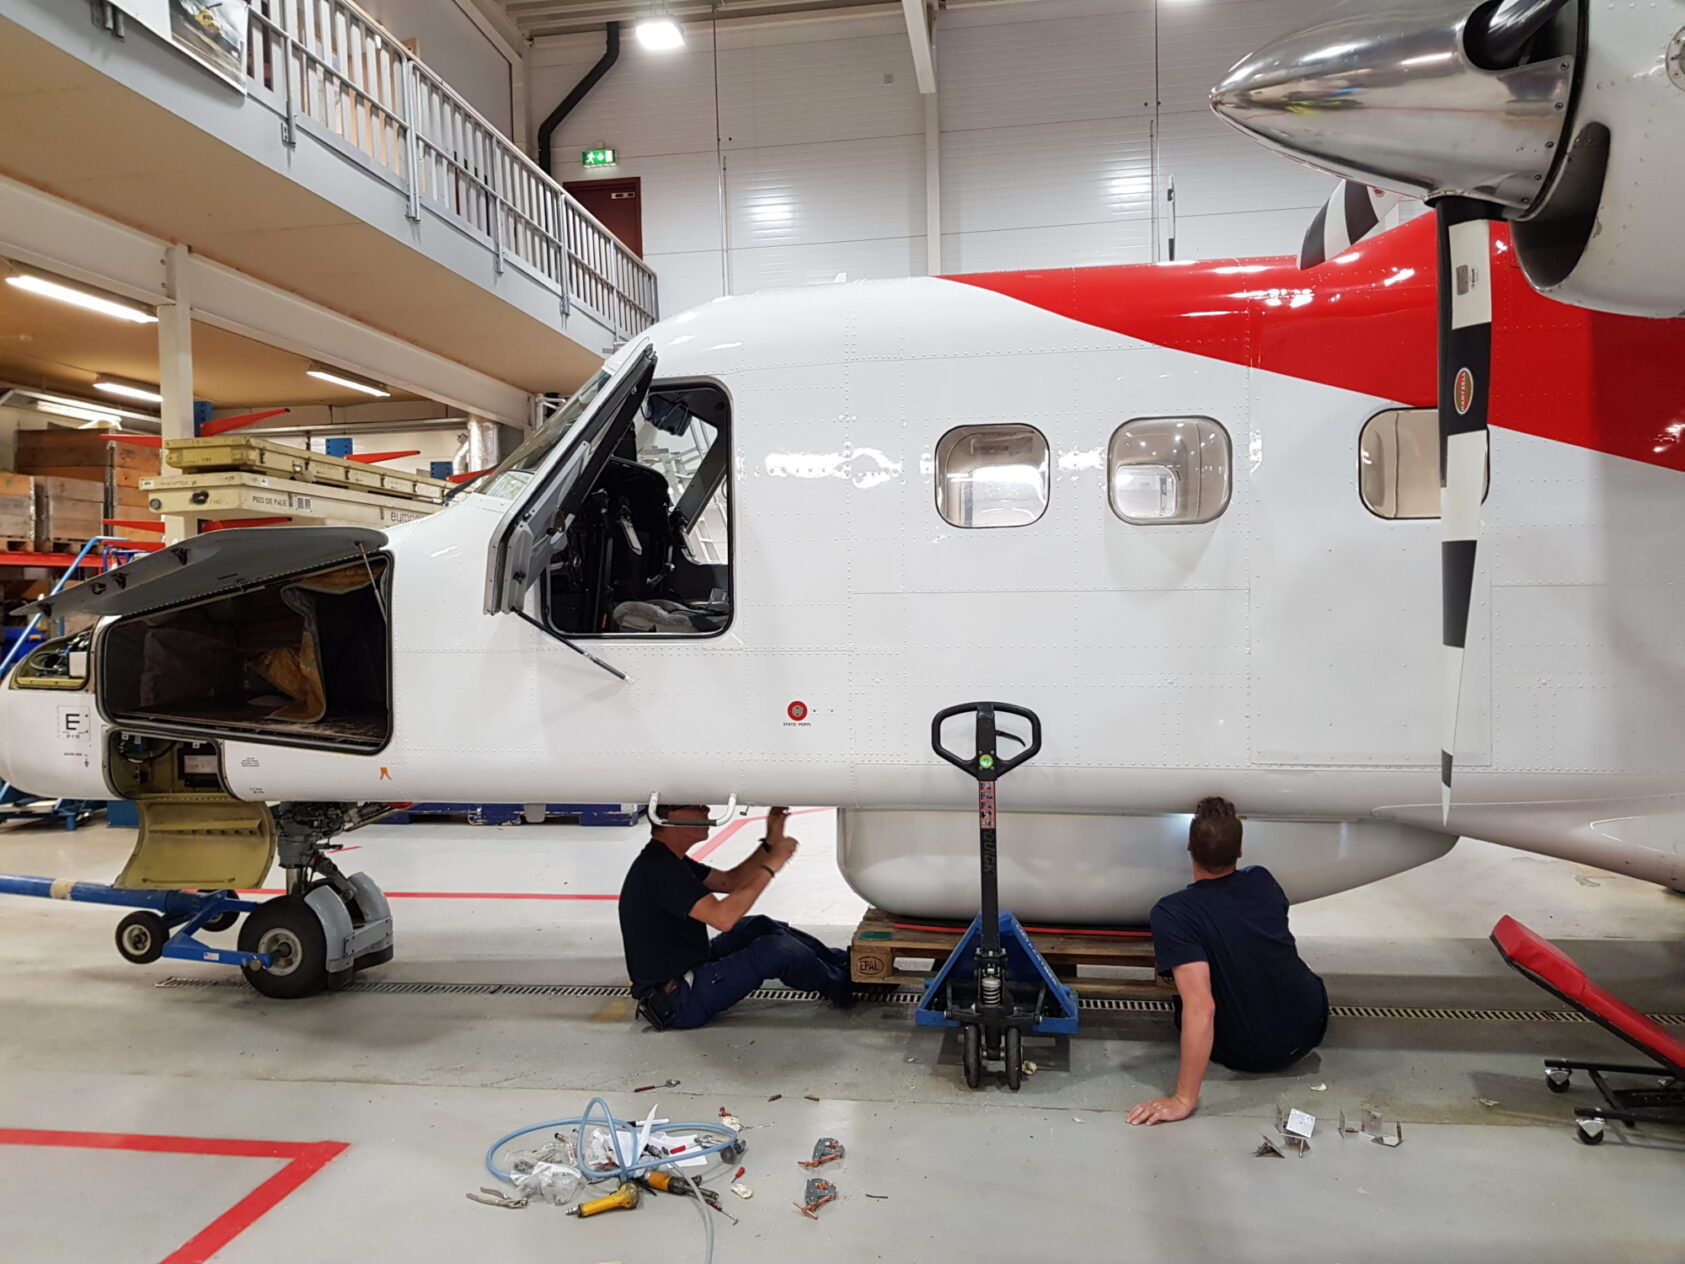 Rannveig H. Stiberg., No, it’s not a bath tub. The pod the aircraft technicians from Bromma Air Maintenance are installing under the body of the Dornier contains equipment you normally find in remote-sensing satellites., 20180614 092013, , 